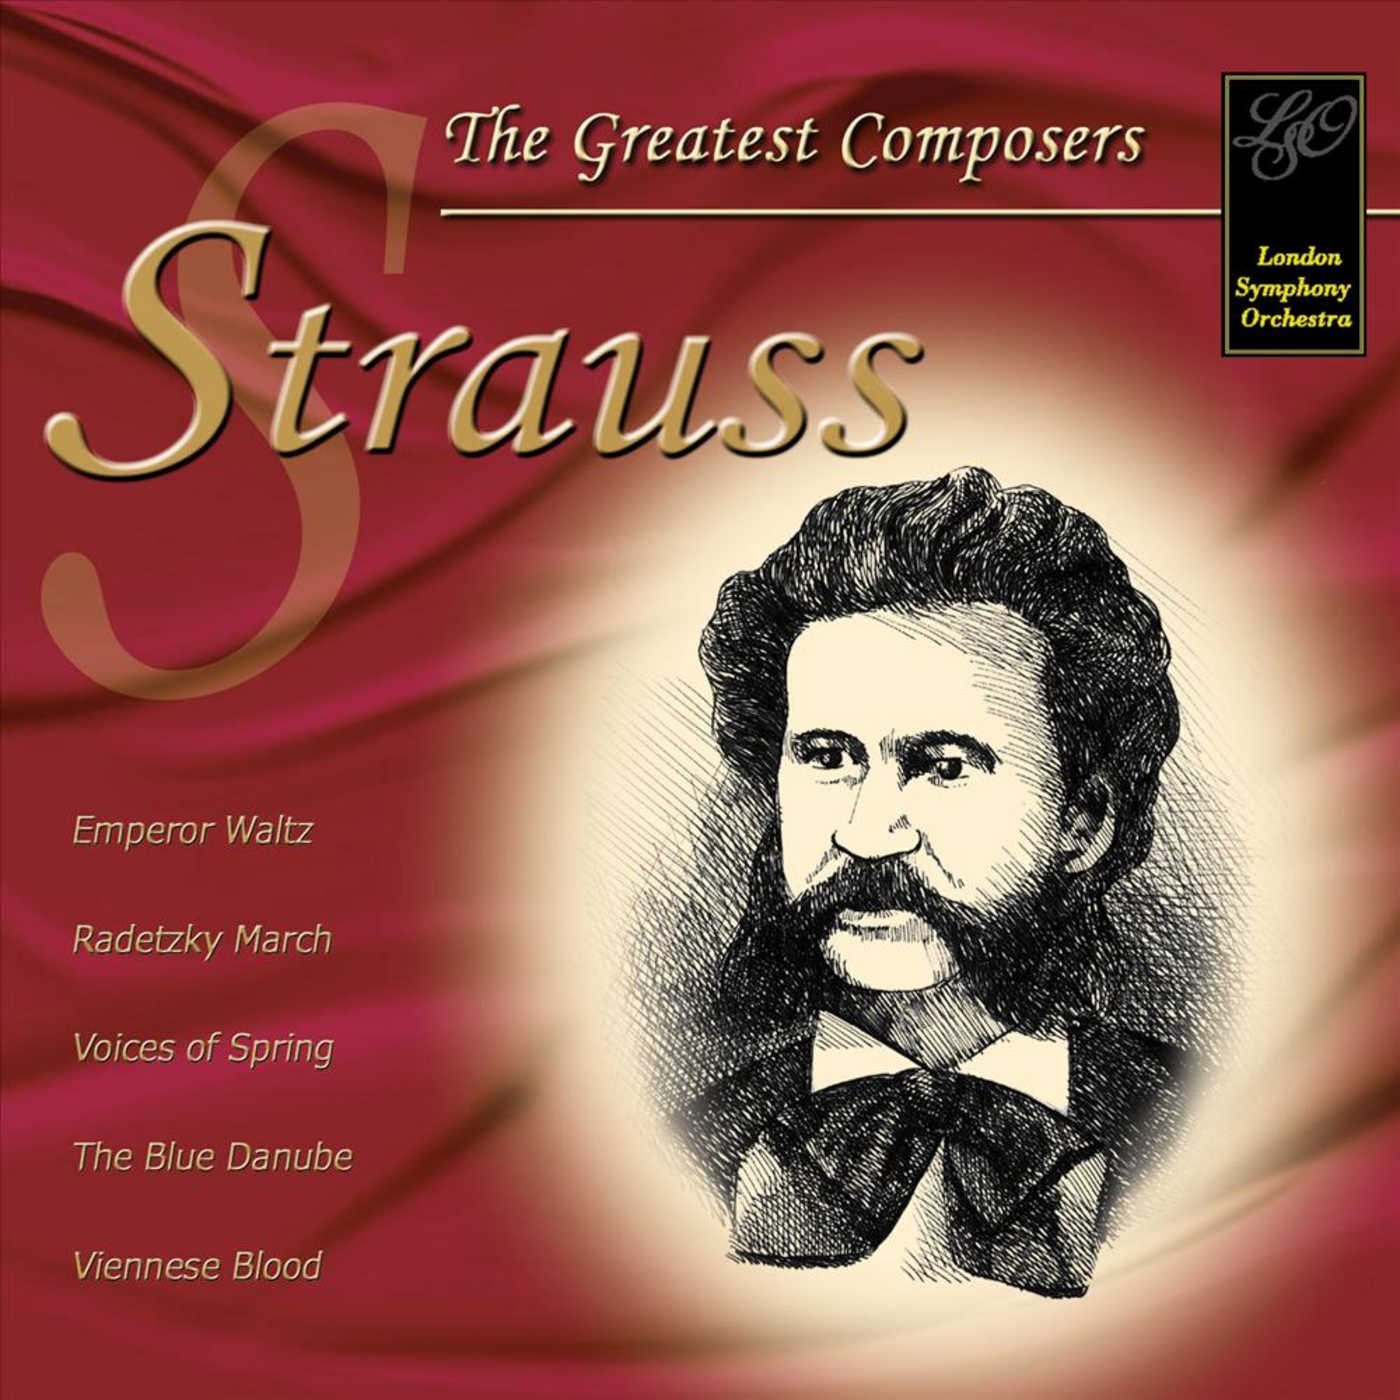 Strauss: The Greatest Composers